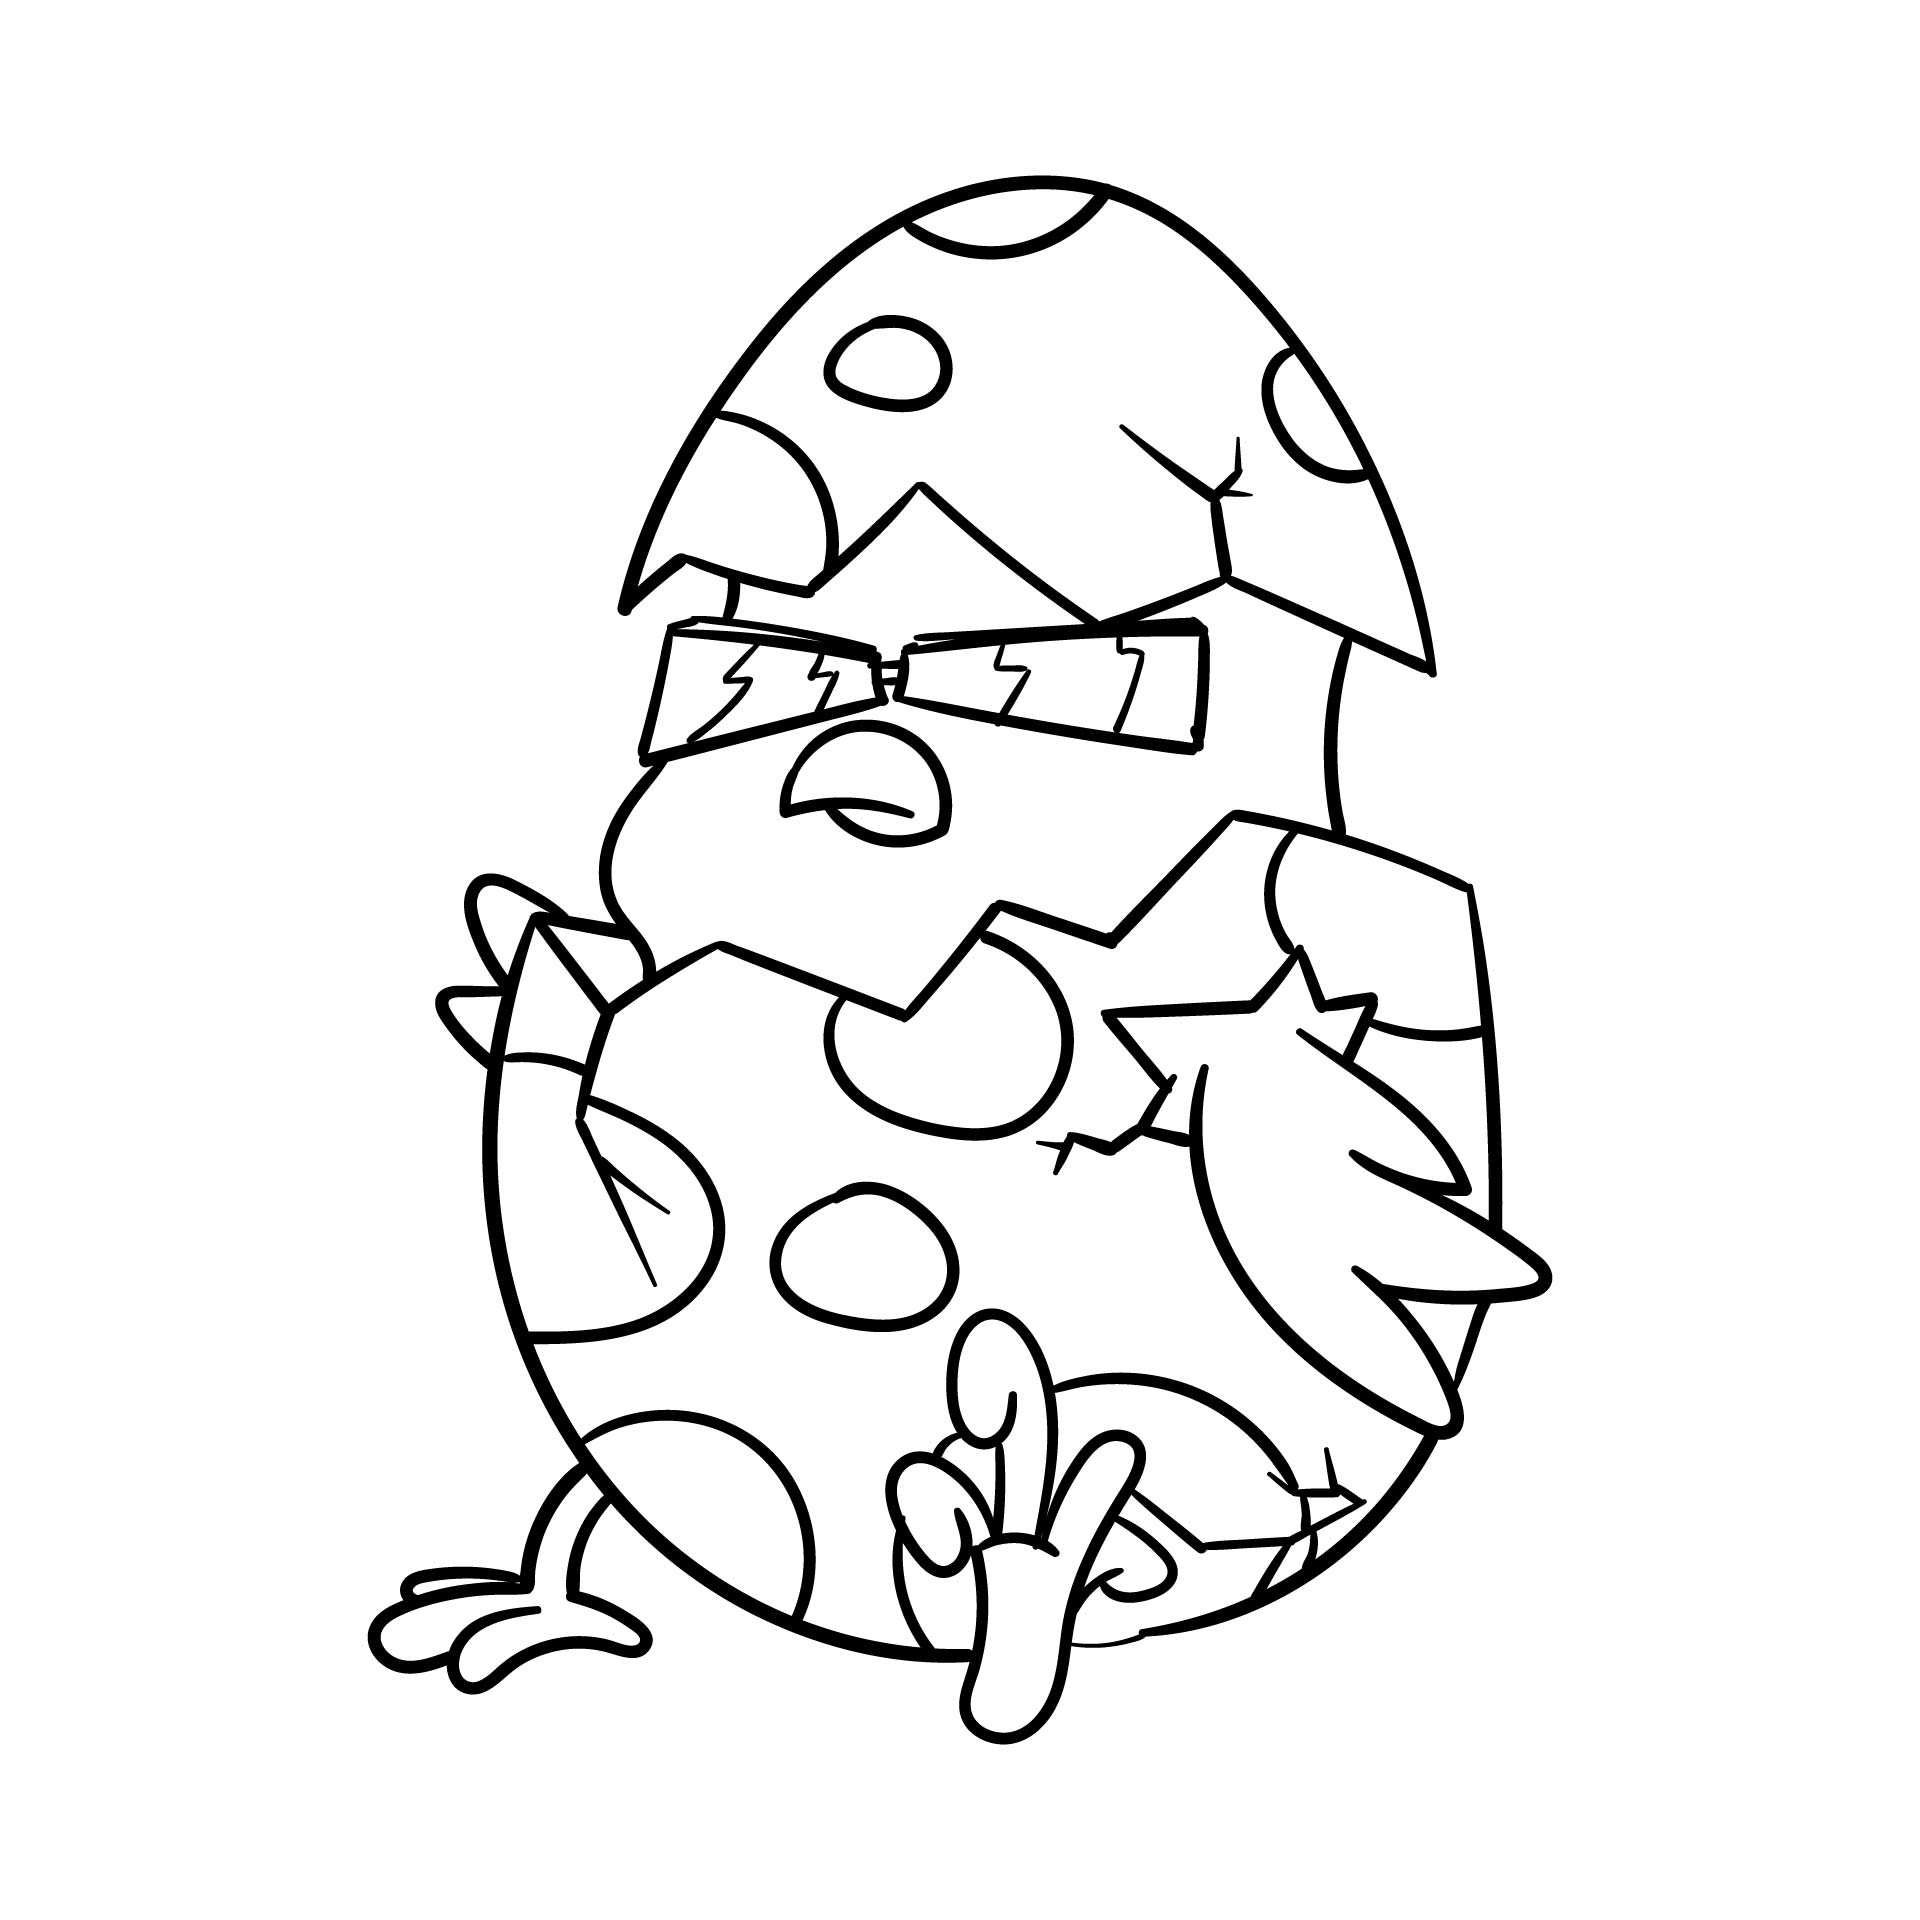 Easter Chicks Coloring Pages